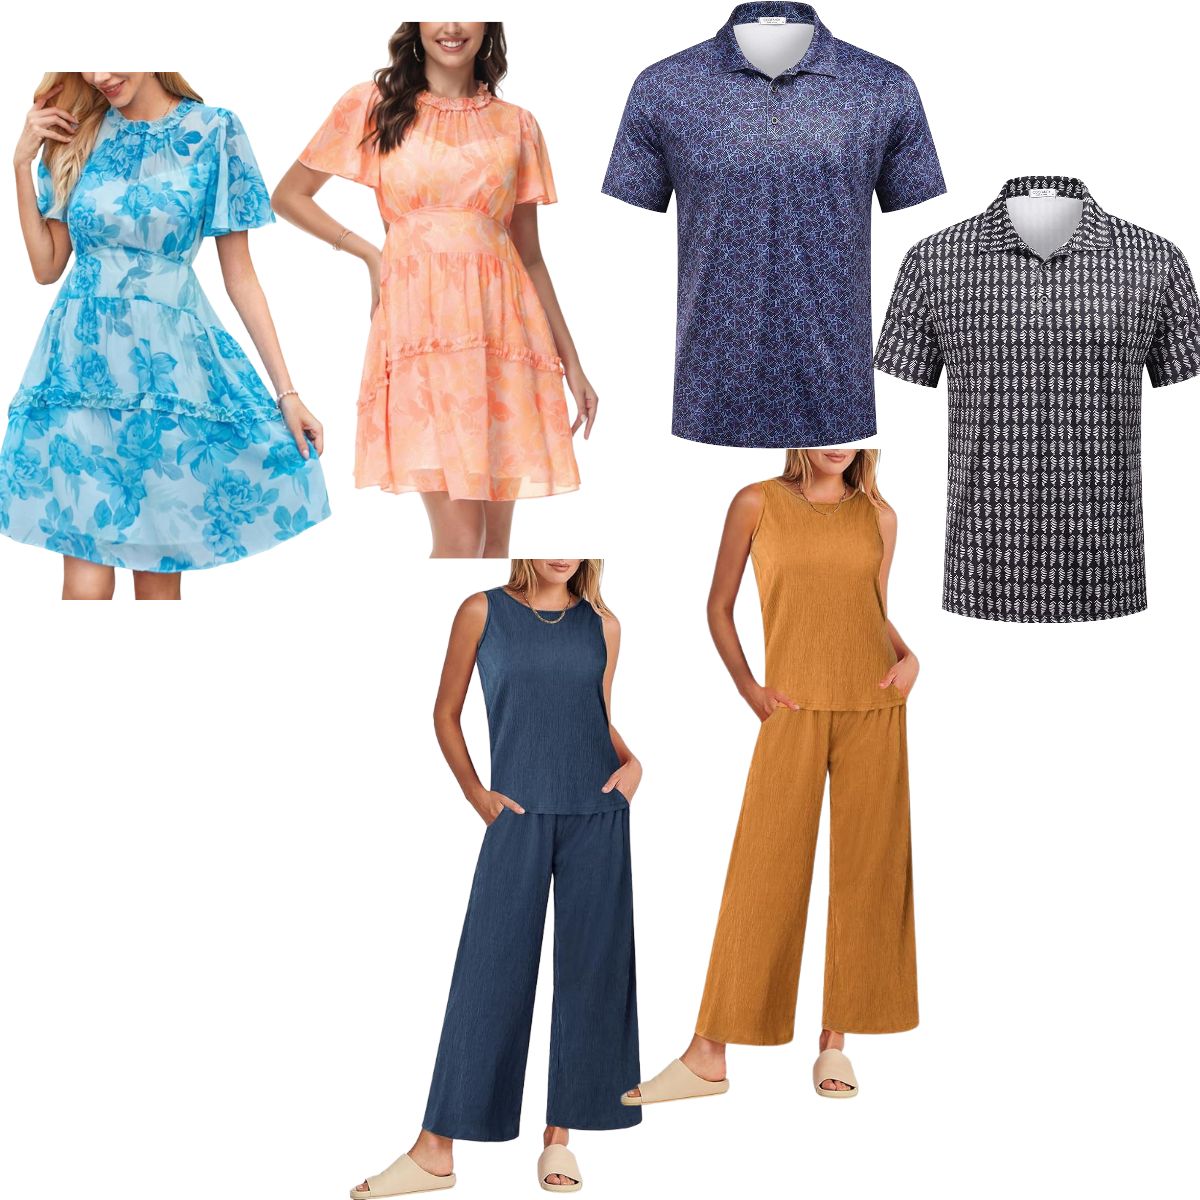 Women's dresses $14+ | 2-pc lounge sets $9+ | Men's quick dry tees from ...